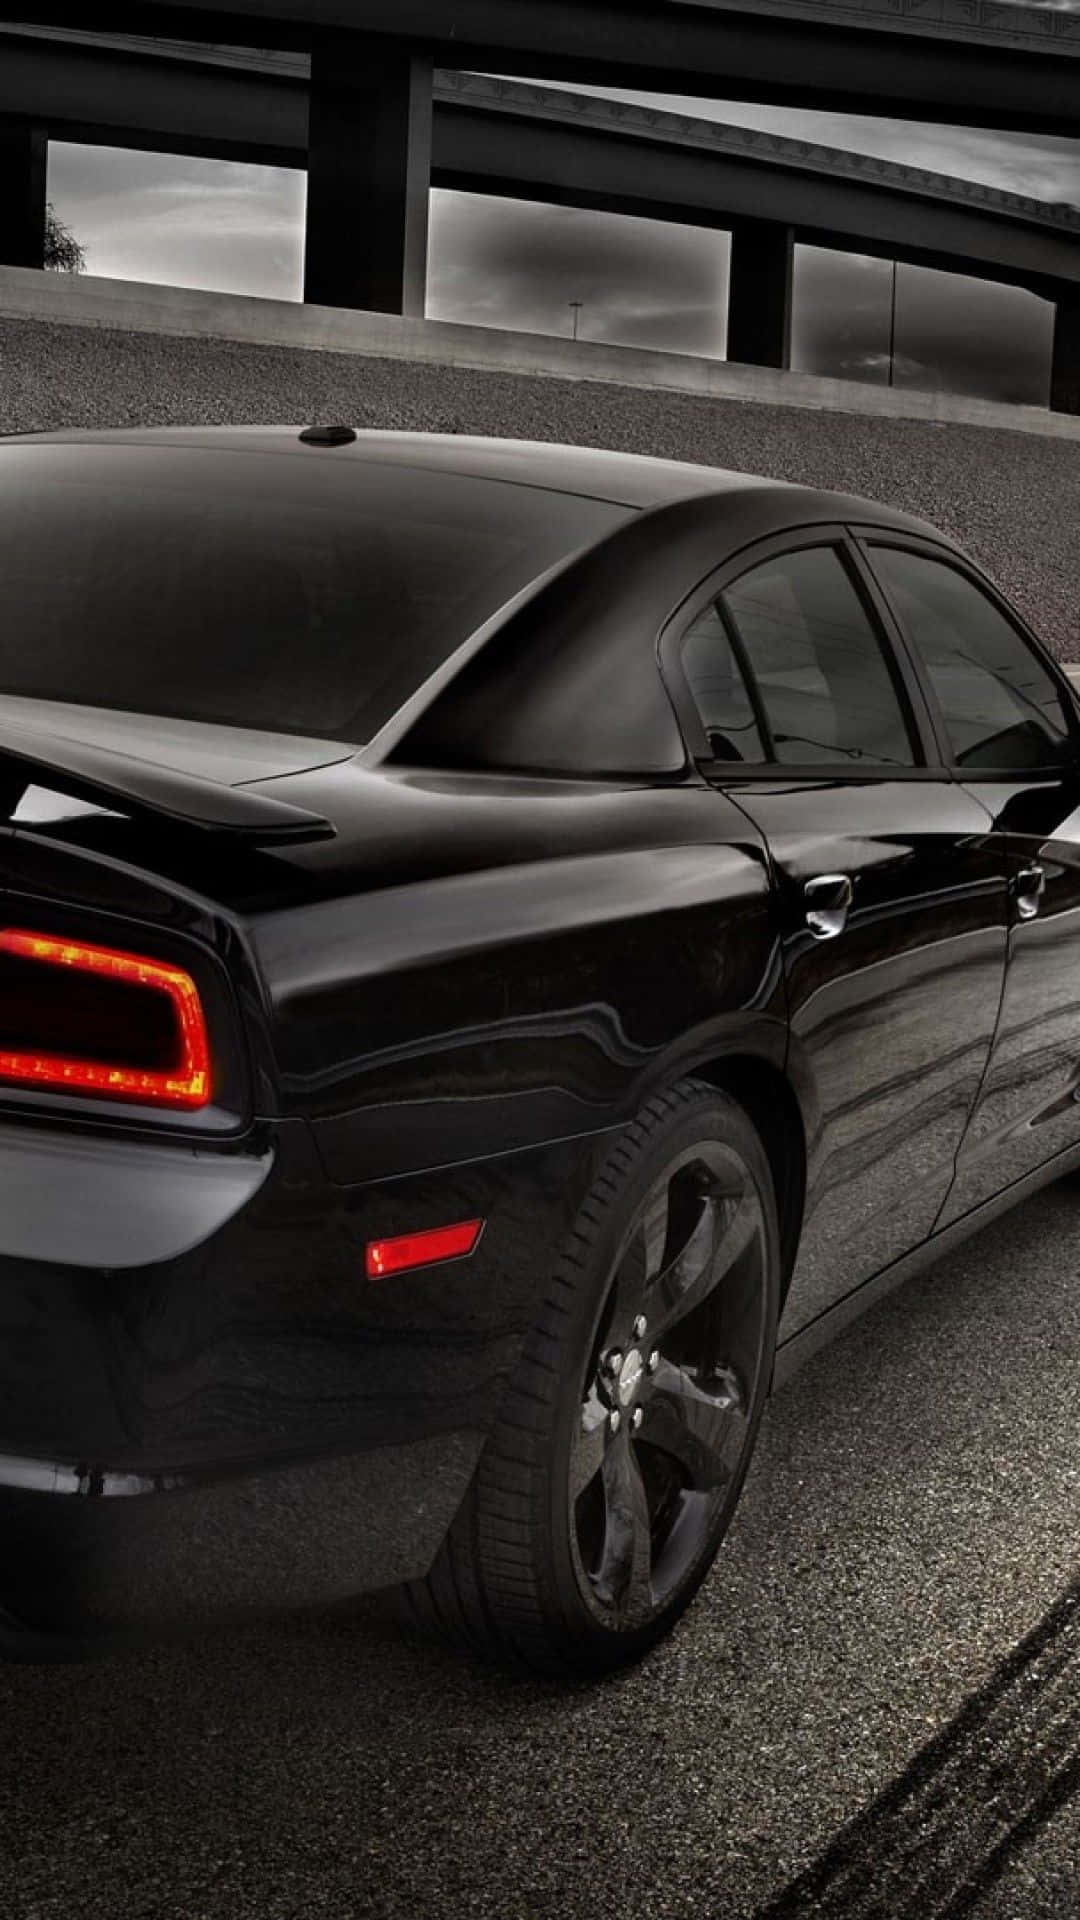 Get ready to take your driving experience up a gear with the Dodge Charger. Wallpaper